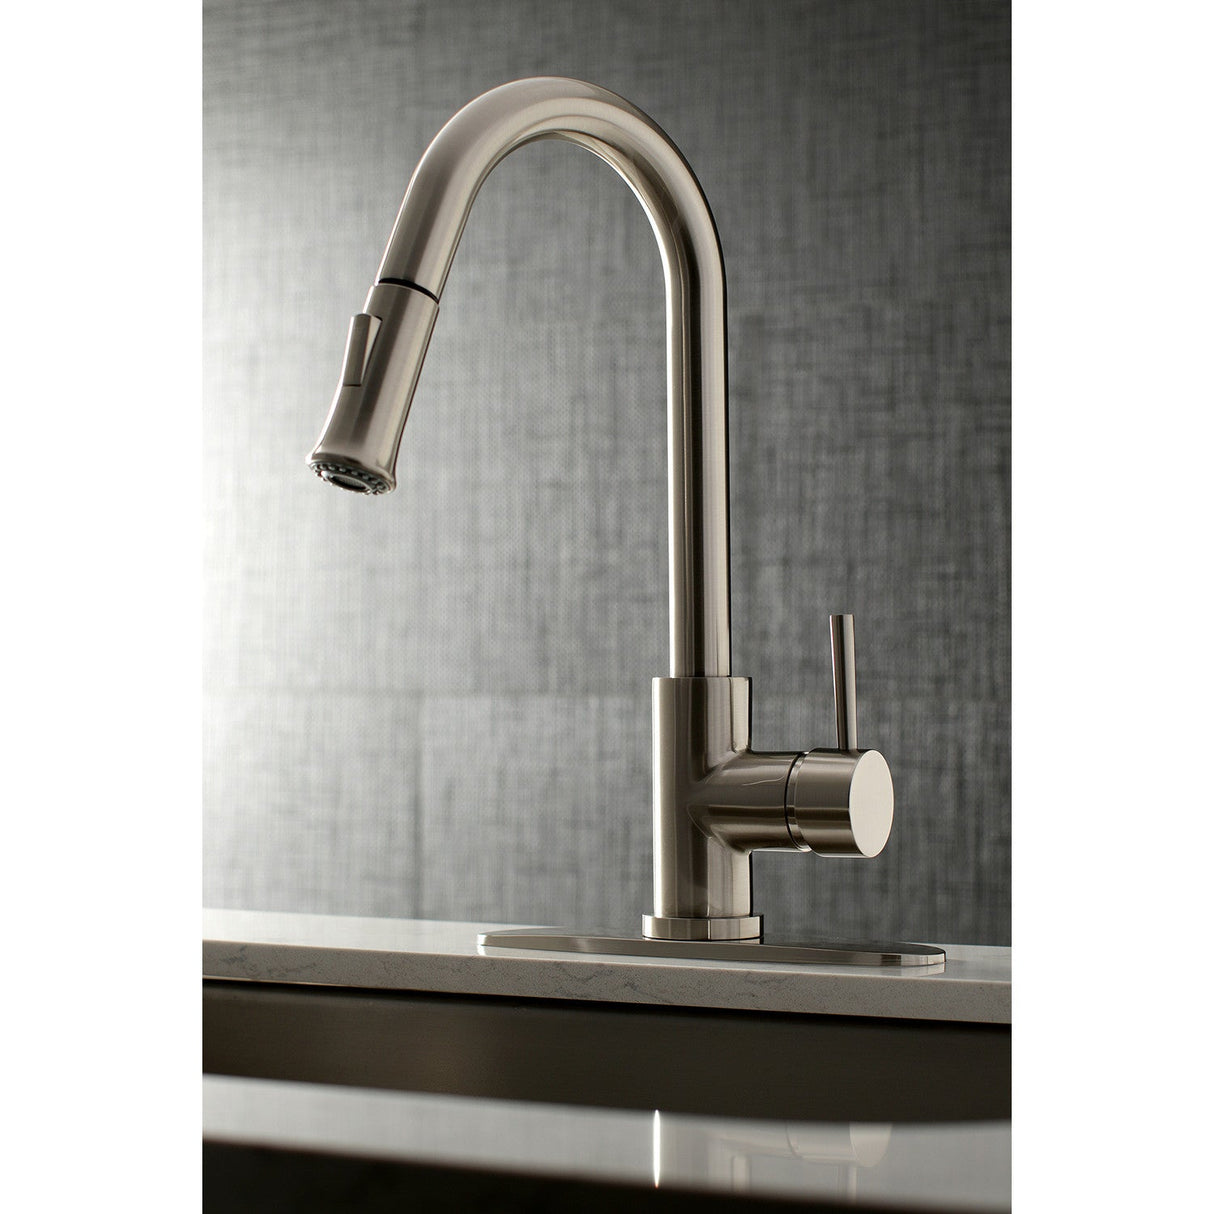 Concord LS8628DL Single-Handle 1-Hole Deck Mount Pull-Down Sprayer Kitchen Faucet, Brushed Nickel